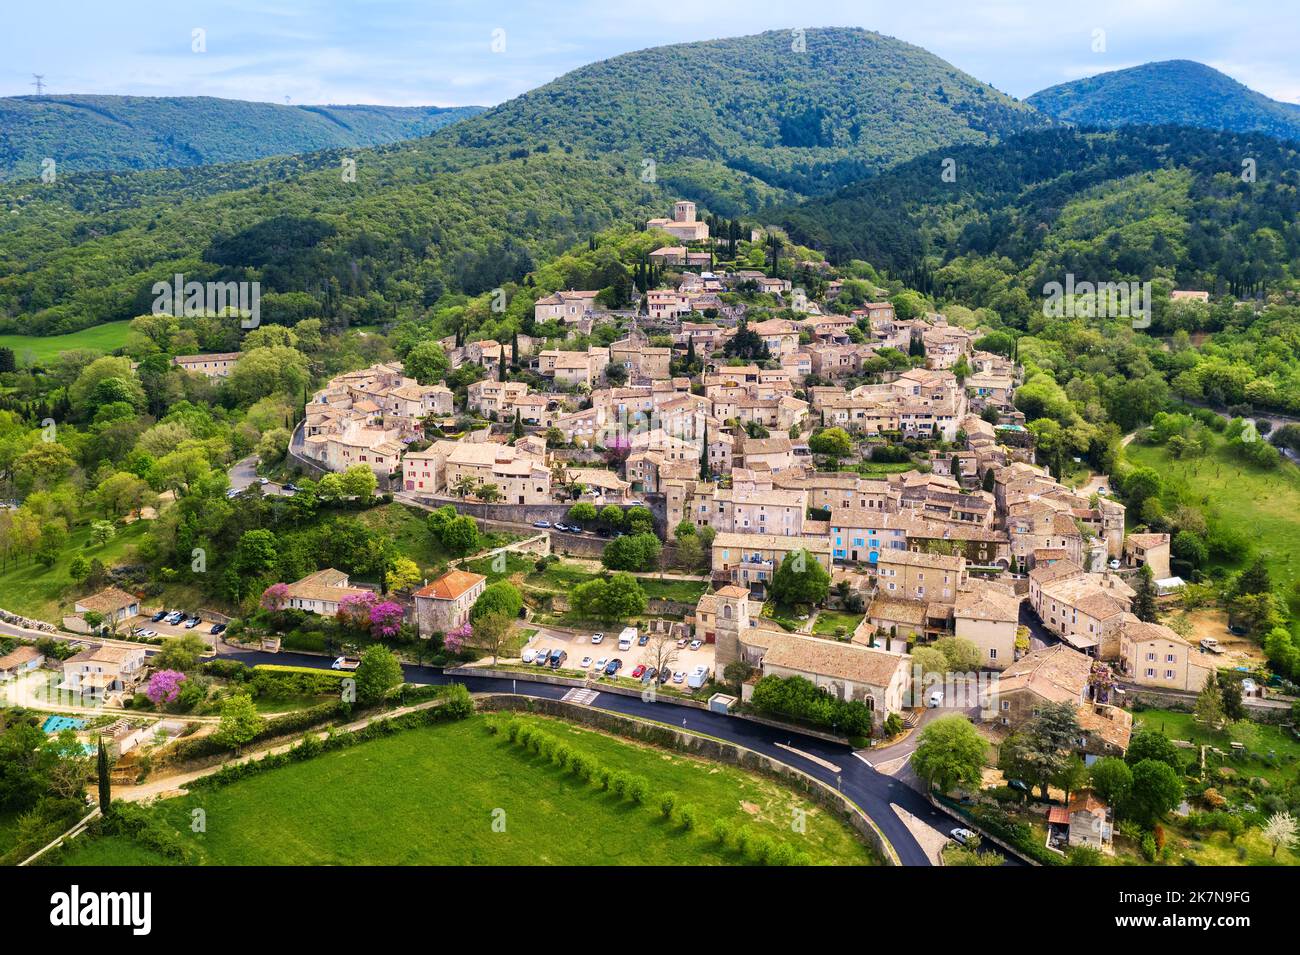 Aerial view of Mirmande, historical hilltop town in Drome department, France, is one of the most beautiful villages in France and a popular tourist de Stock Photo